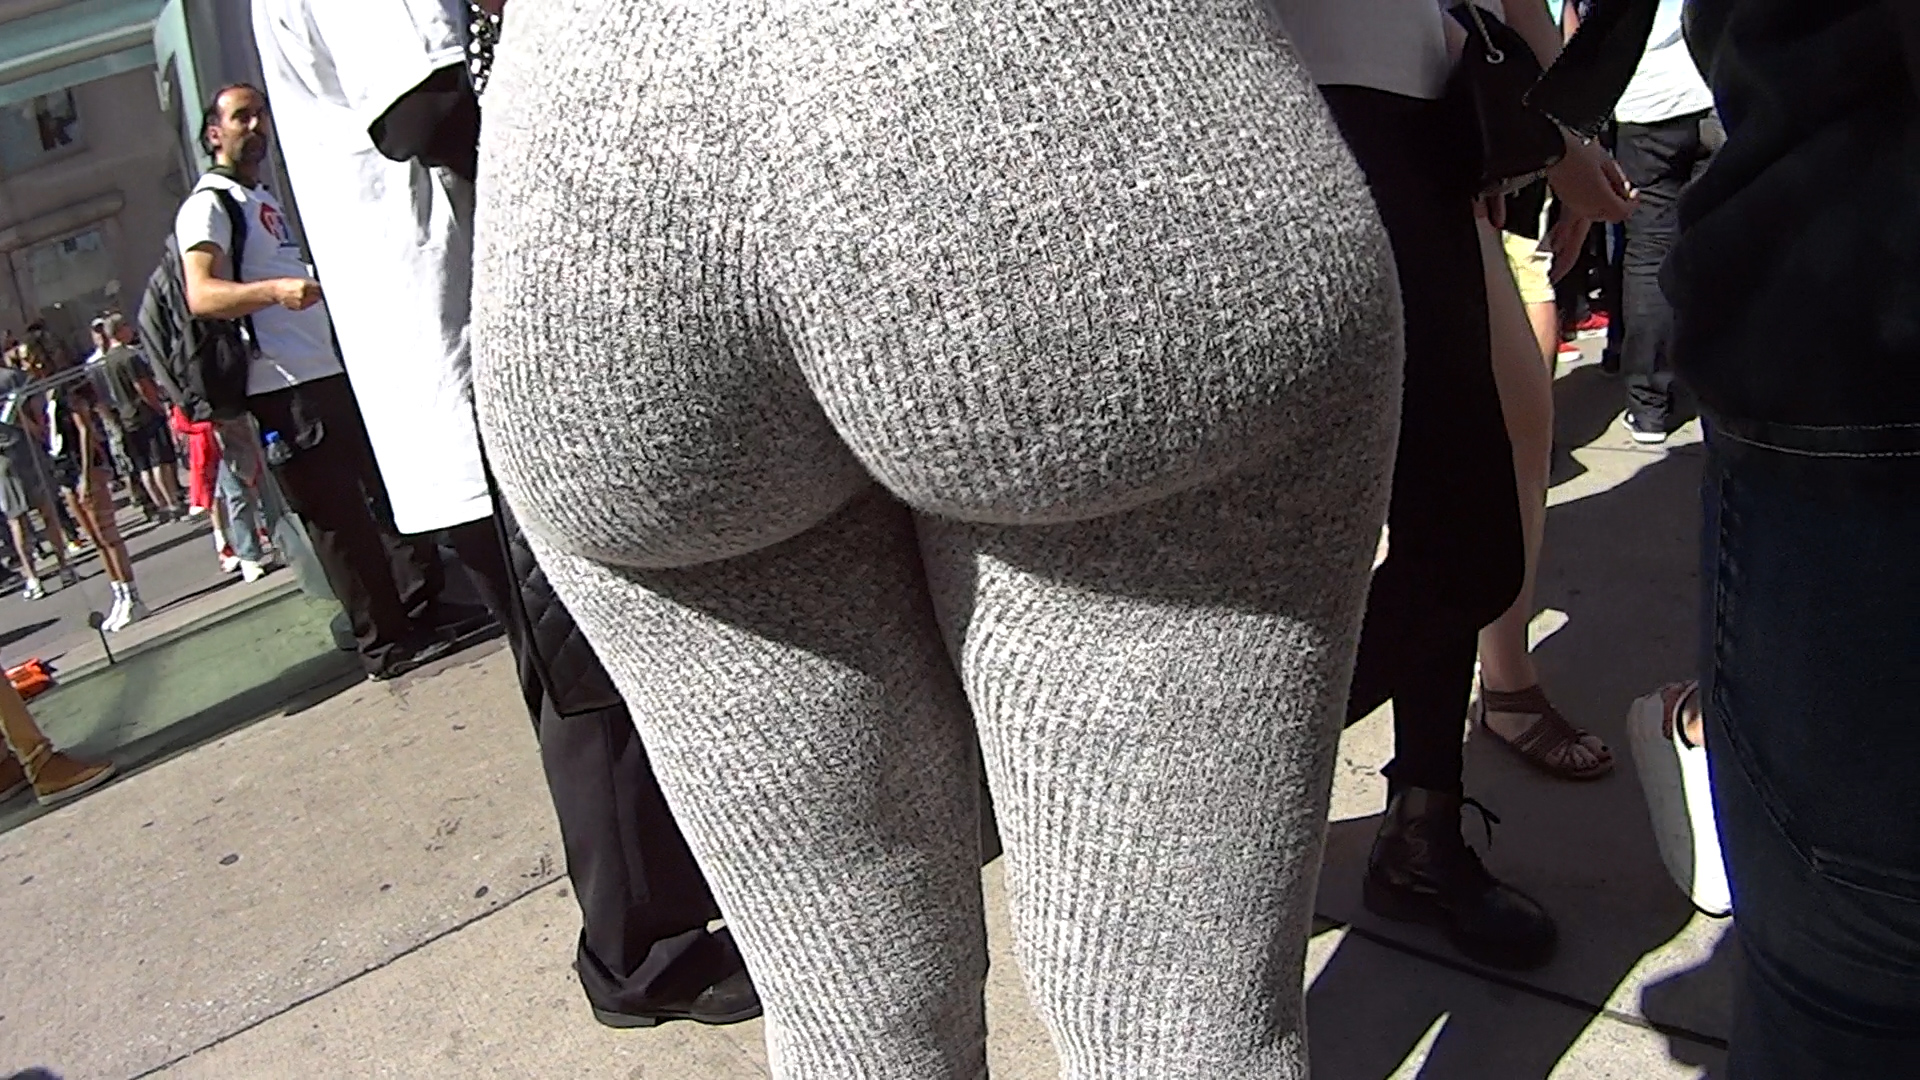 Naked girls jiggling ass leggings Round Booty That Jiggles In Grey Leggings Candid Voyeur Candidarchives